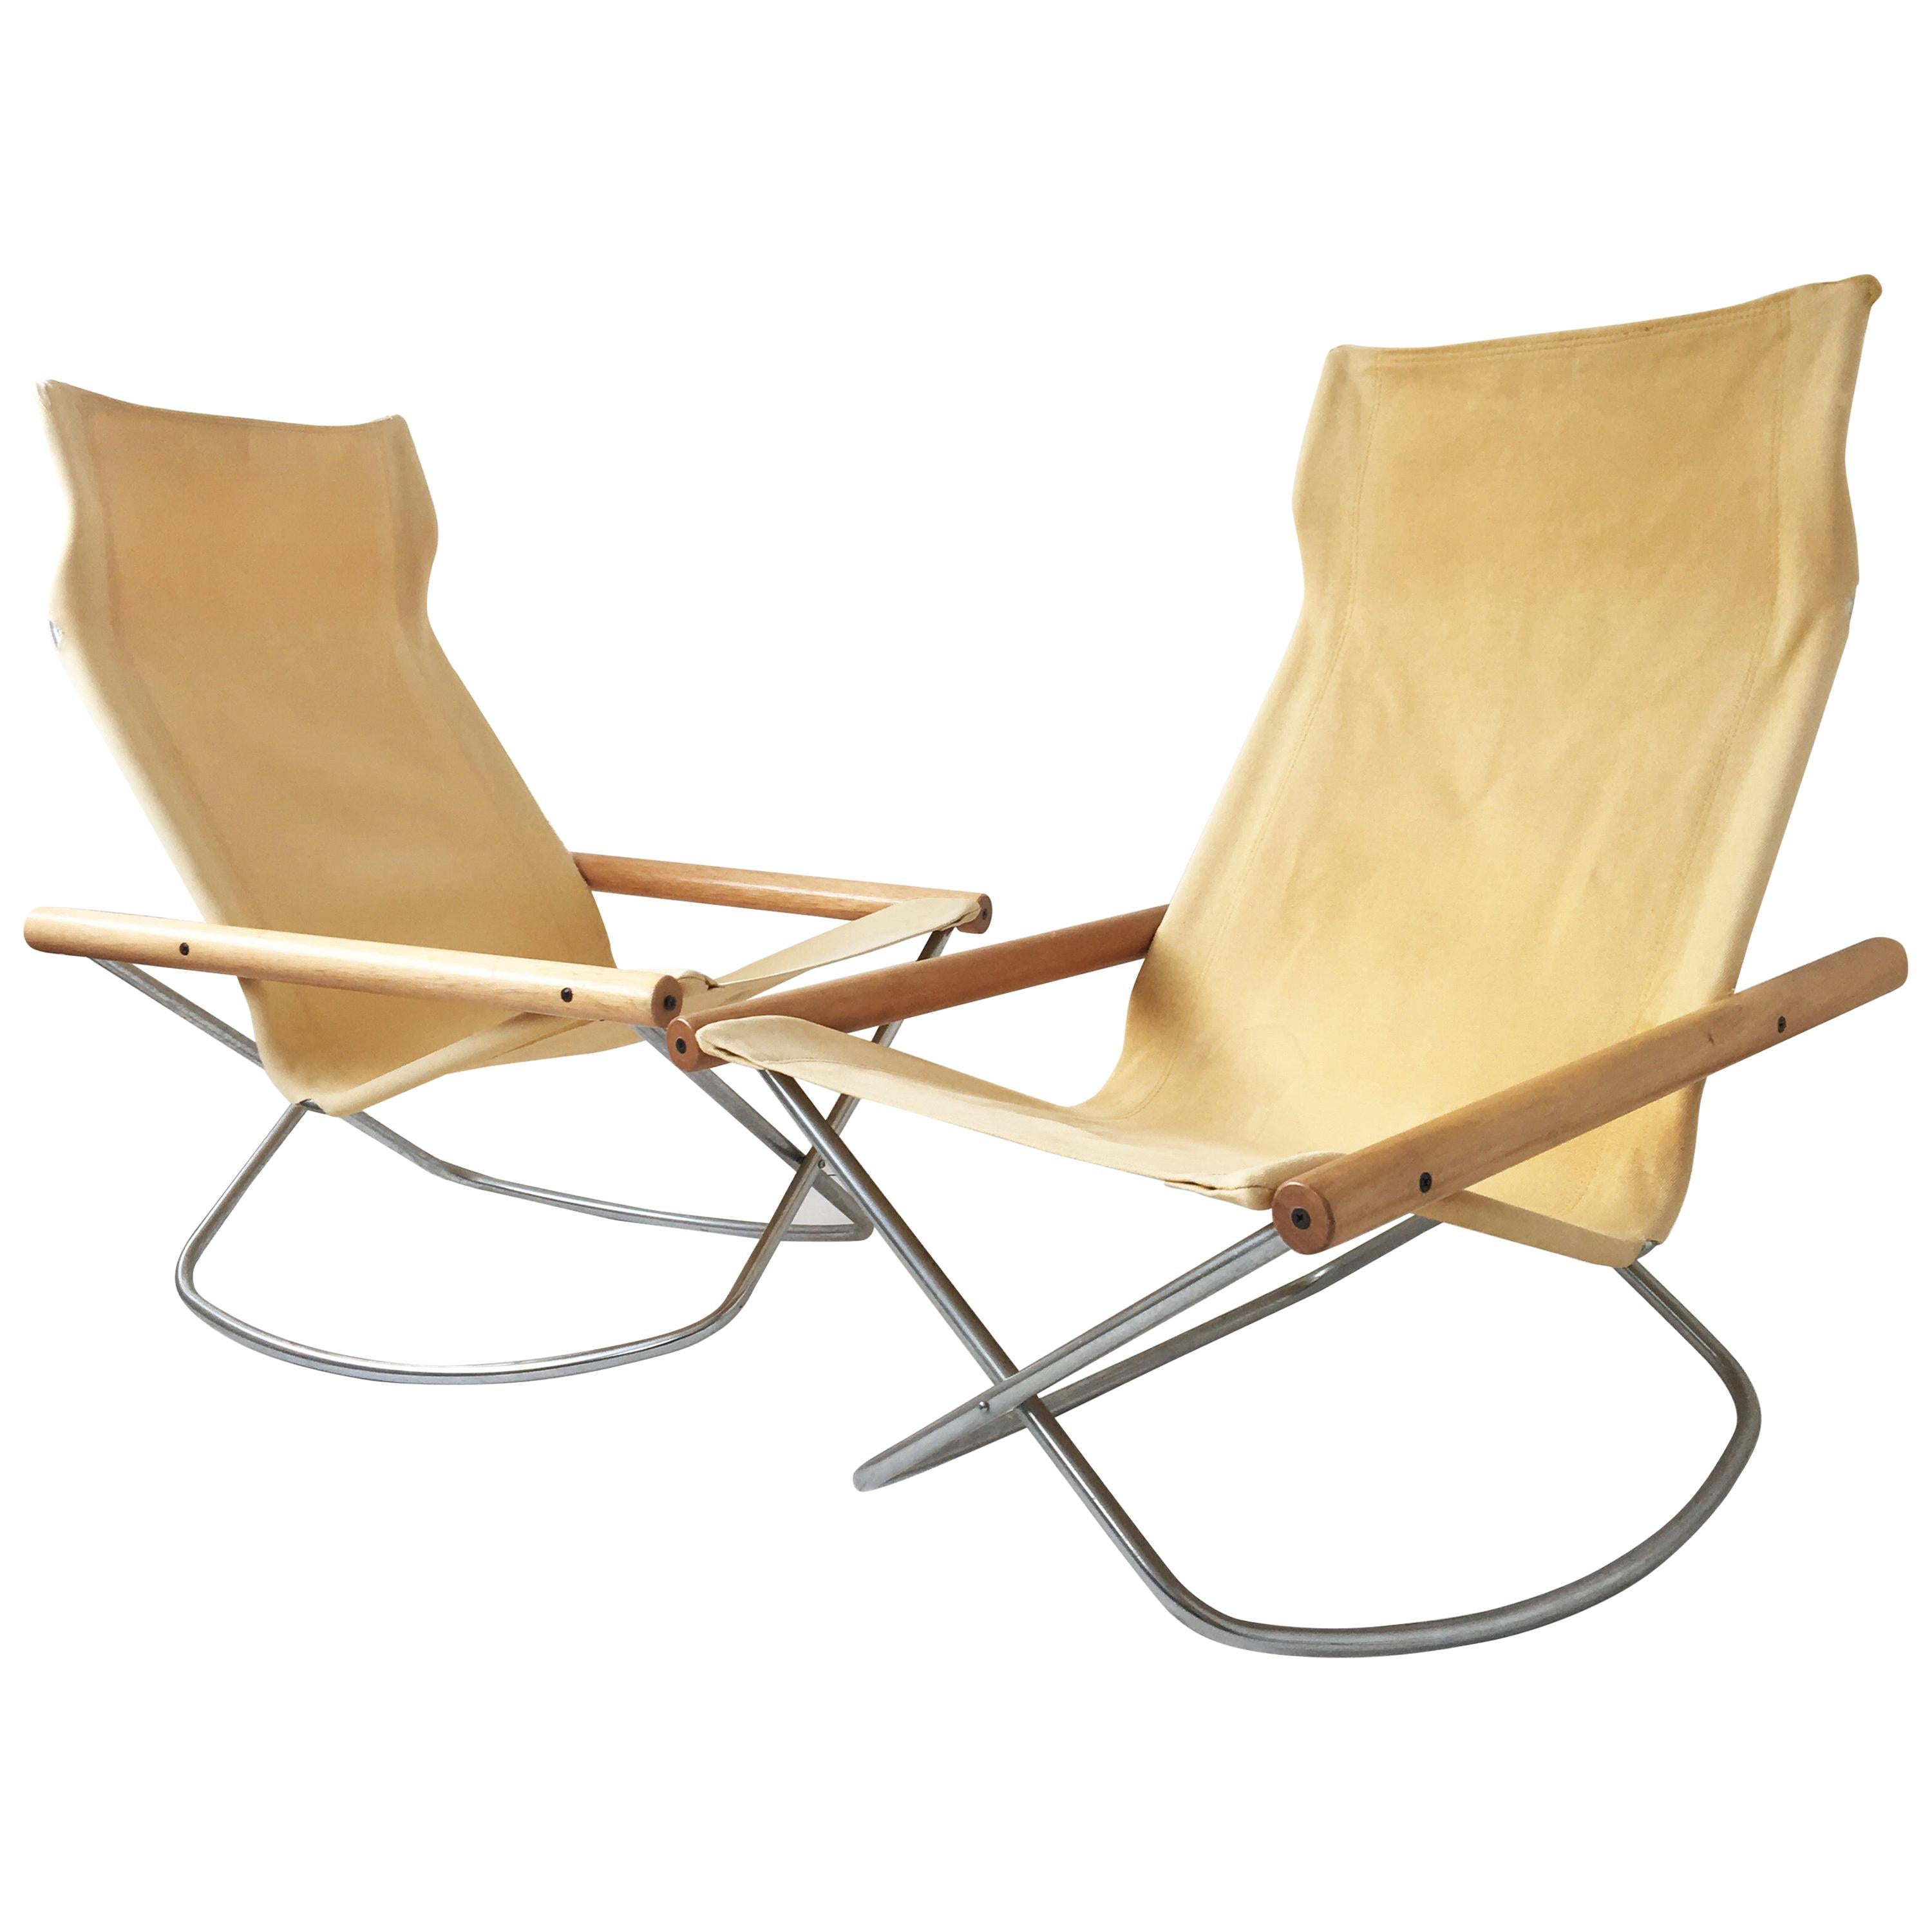 Midcentury Yellow Canvas 'NY' Chairs by Takeshi Nii, for Jox Interni, 1958 For Sale